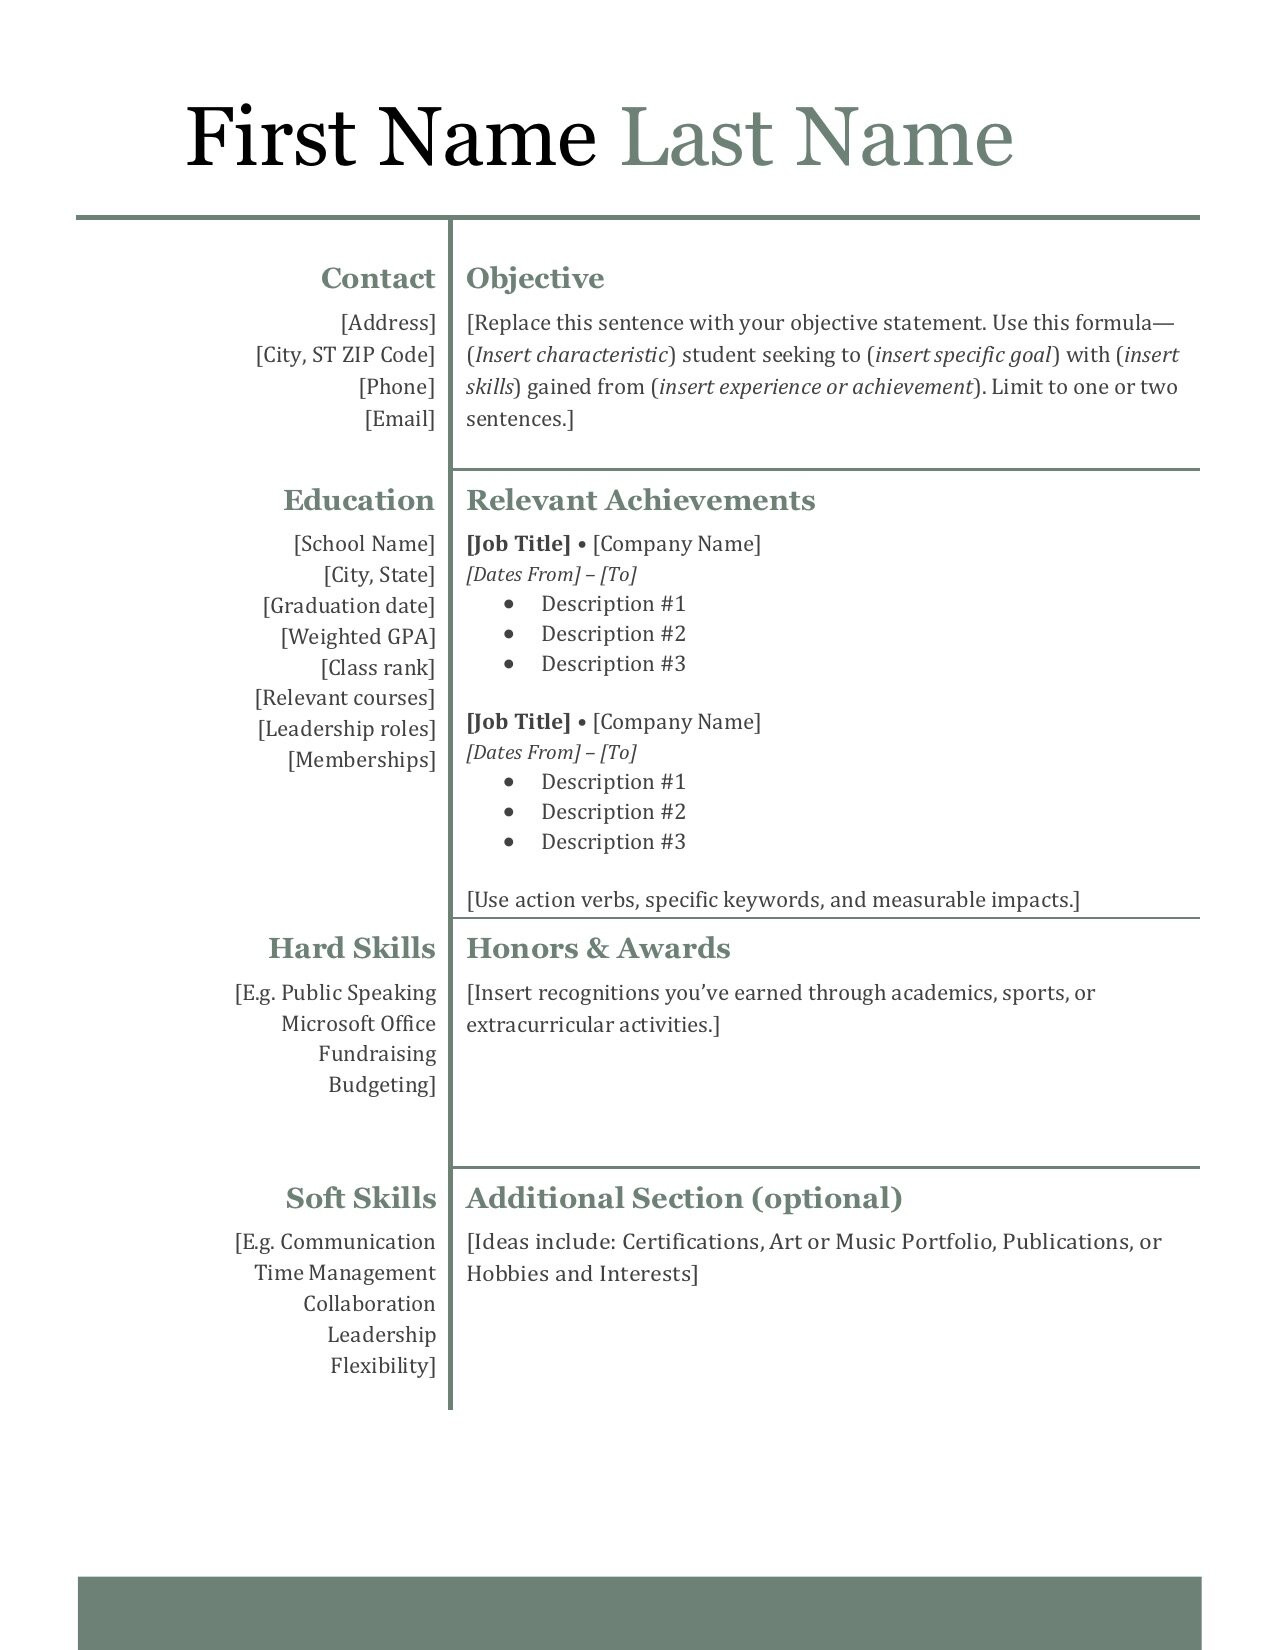 Sample High School Resume for College Applications How to Write An Impressive High School Resume â Shemmassian …